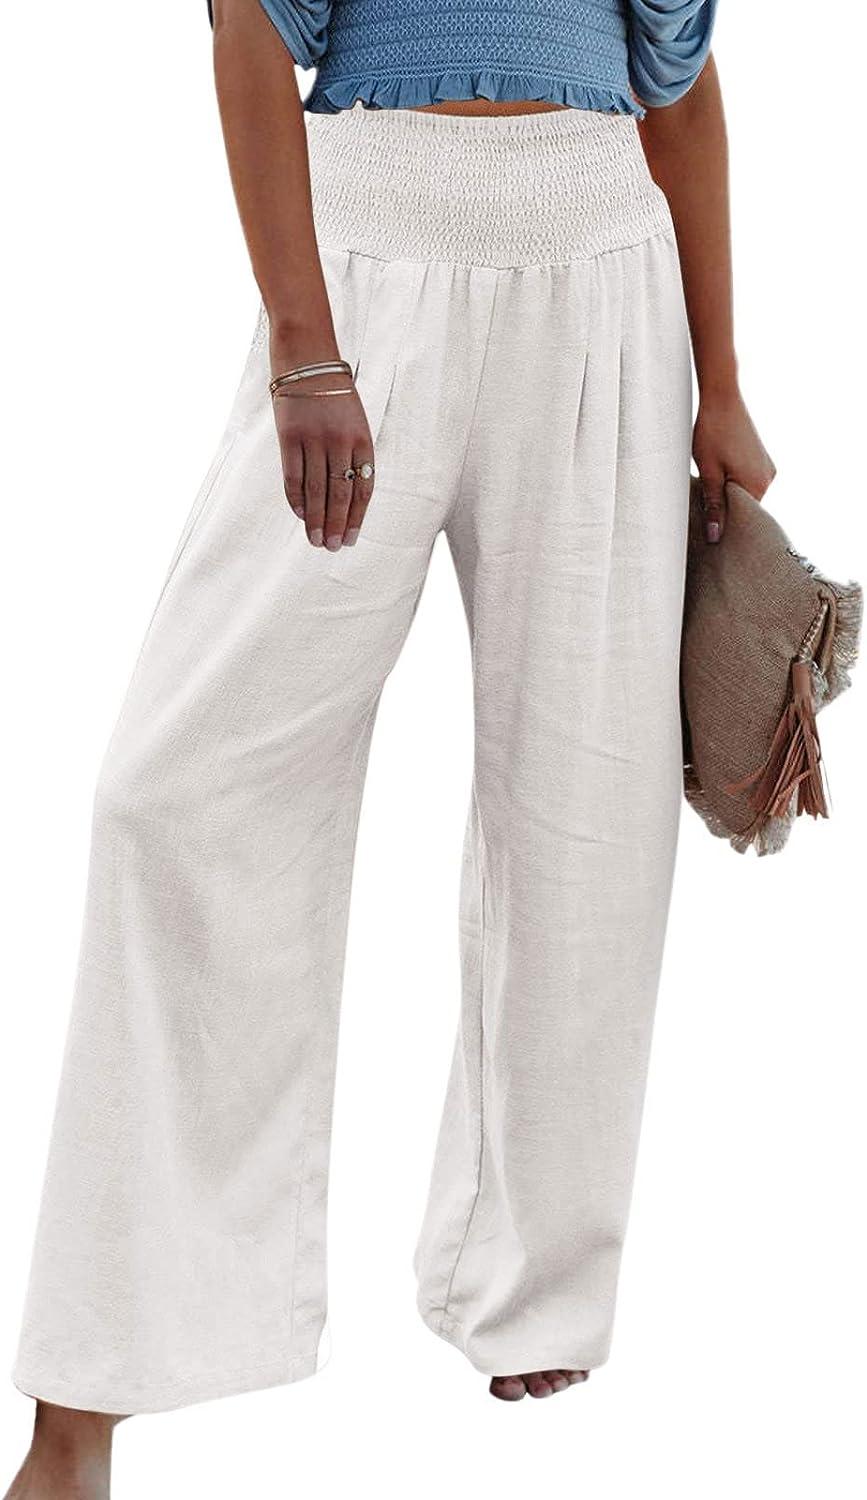 Womens Palazzo Long Pants High Waist Wide Leg Stretchy Loose Fit